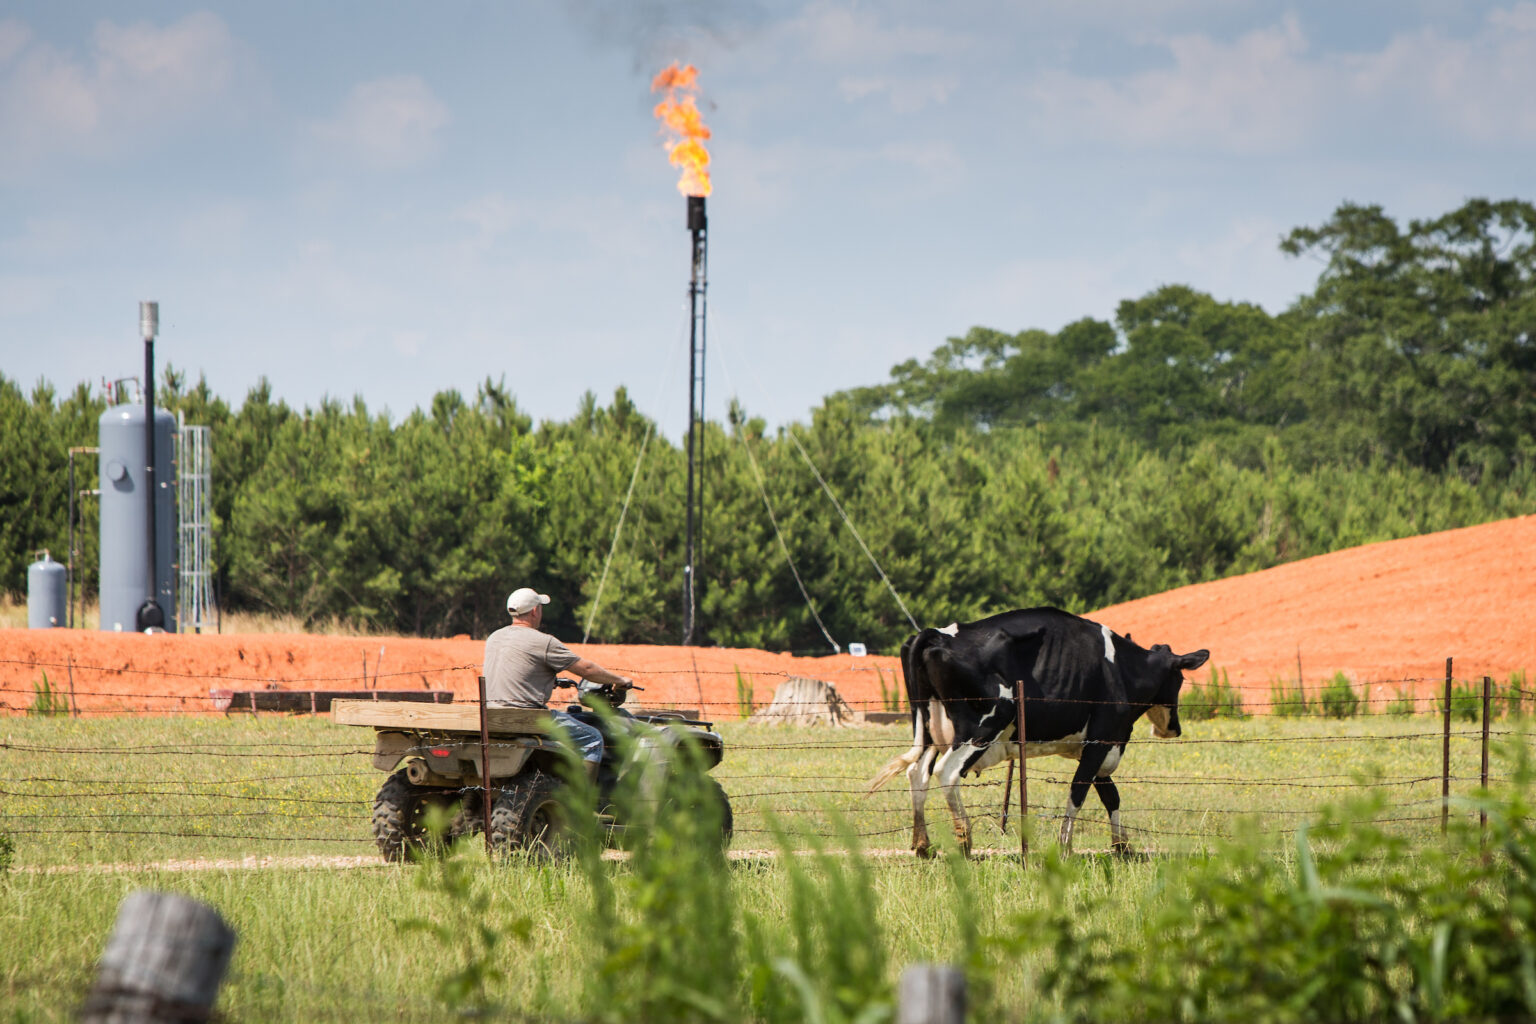 A man on a four-wheeler drives behind a black and white dairy cow through a field, with orange construction fencing and a fracking well flare and tanks beyond.